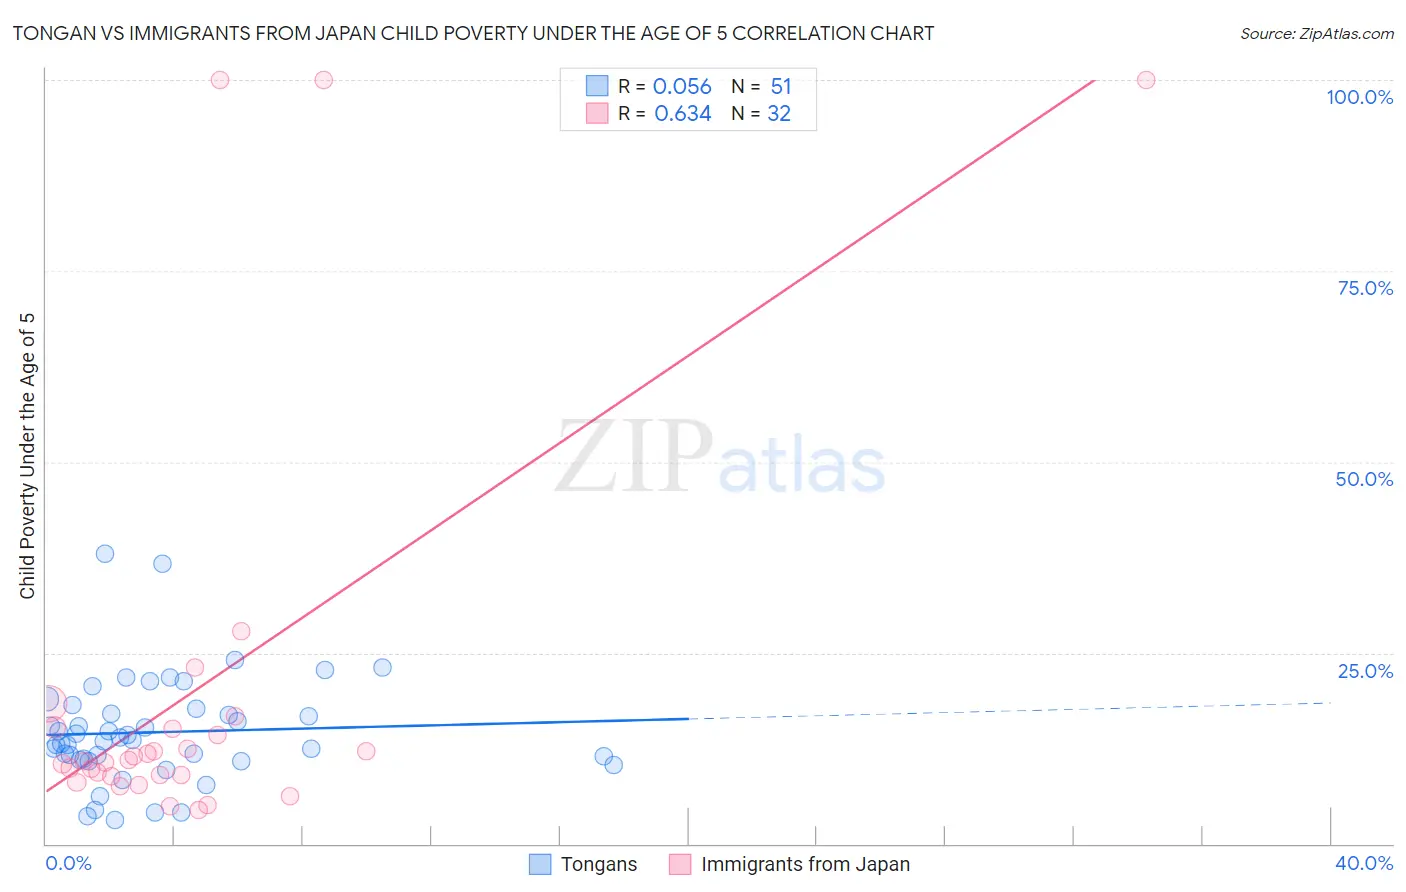 Tongan vs Immigrants from Japan Child Poverty Under the Age of 5